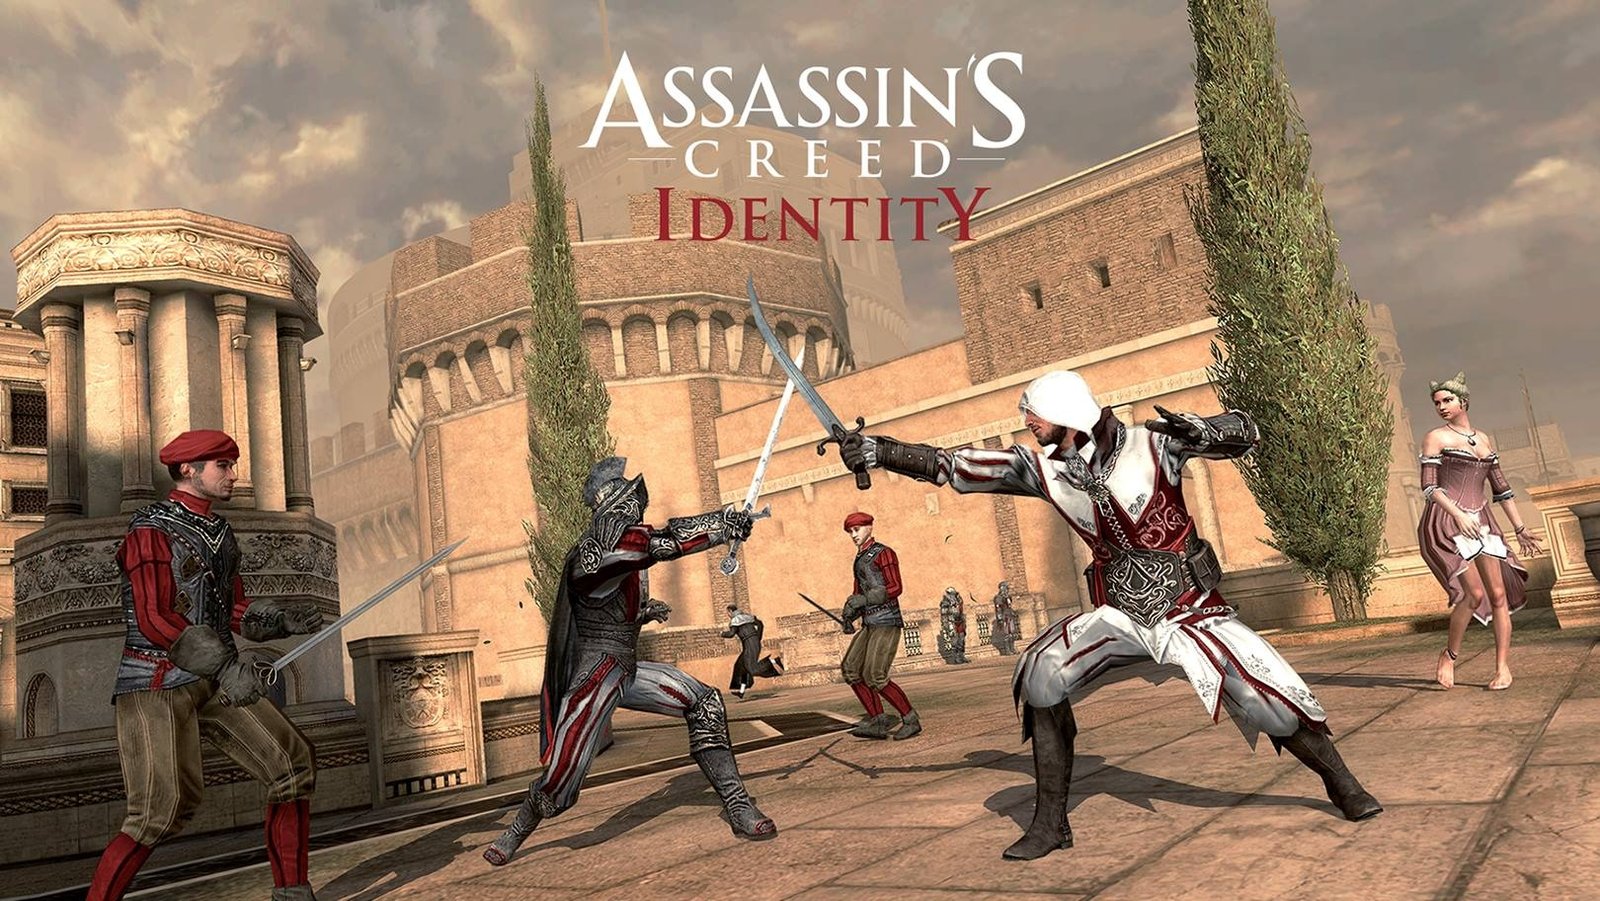 assassins creed identity was the first game from series released for mobile devices